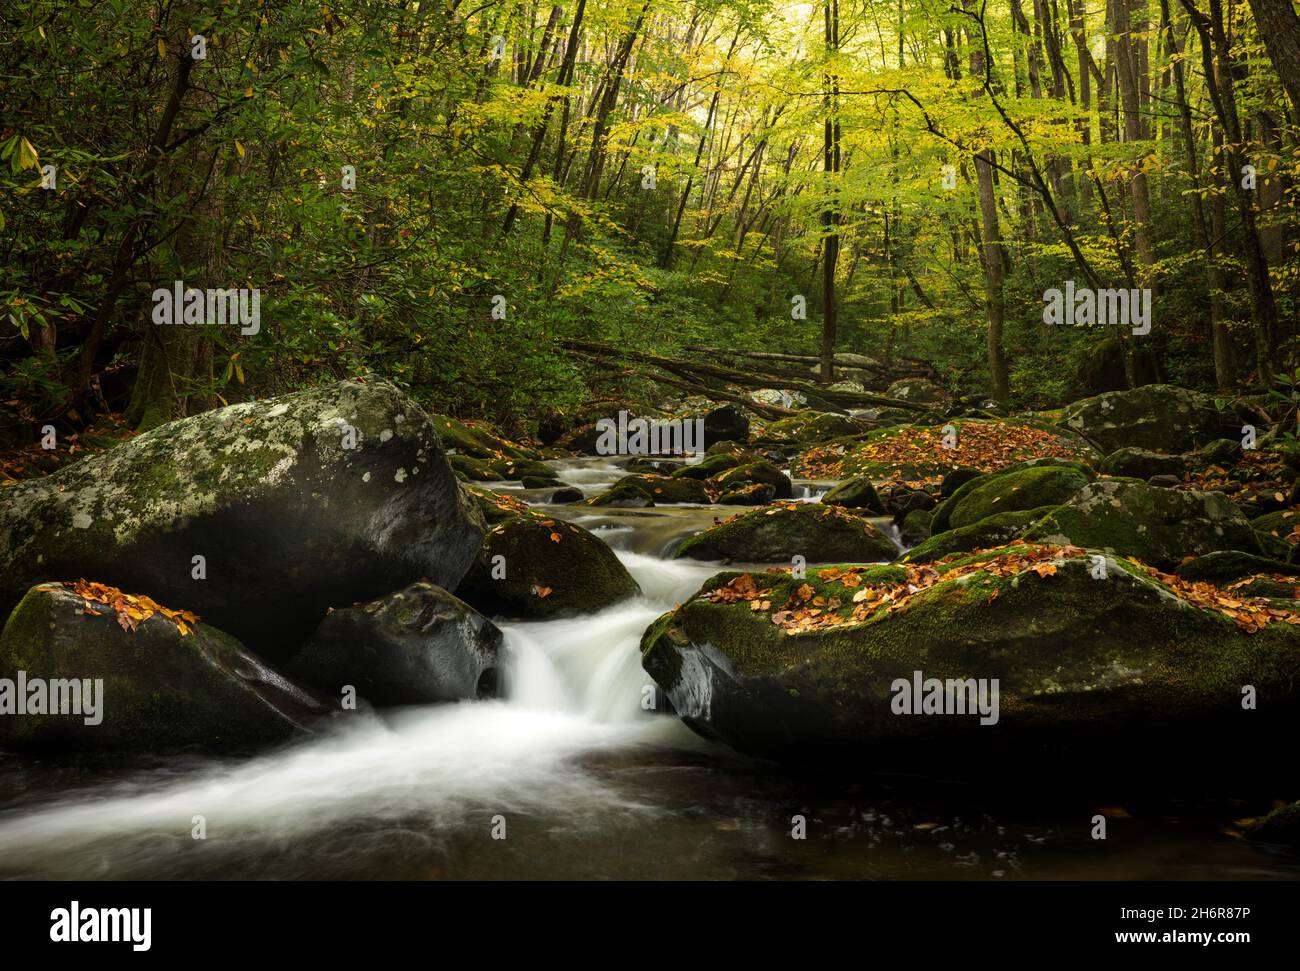 Autumn color on Lynn Camp Prong, Great Smoky Mountain National Park - Sevier County, Tennessee. Lynn Camp Prong meanders through leaf covered boulders Stock Photo